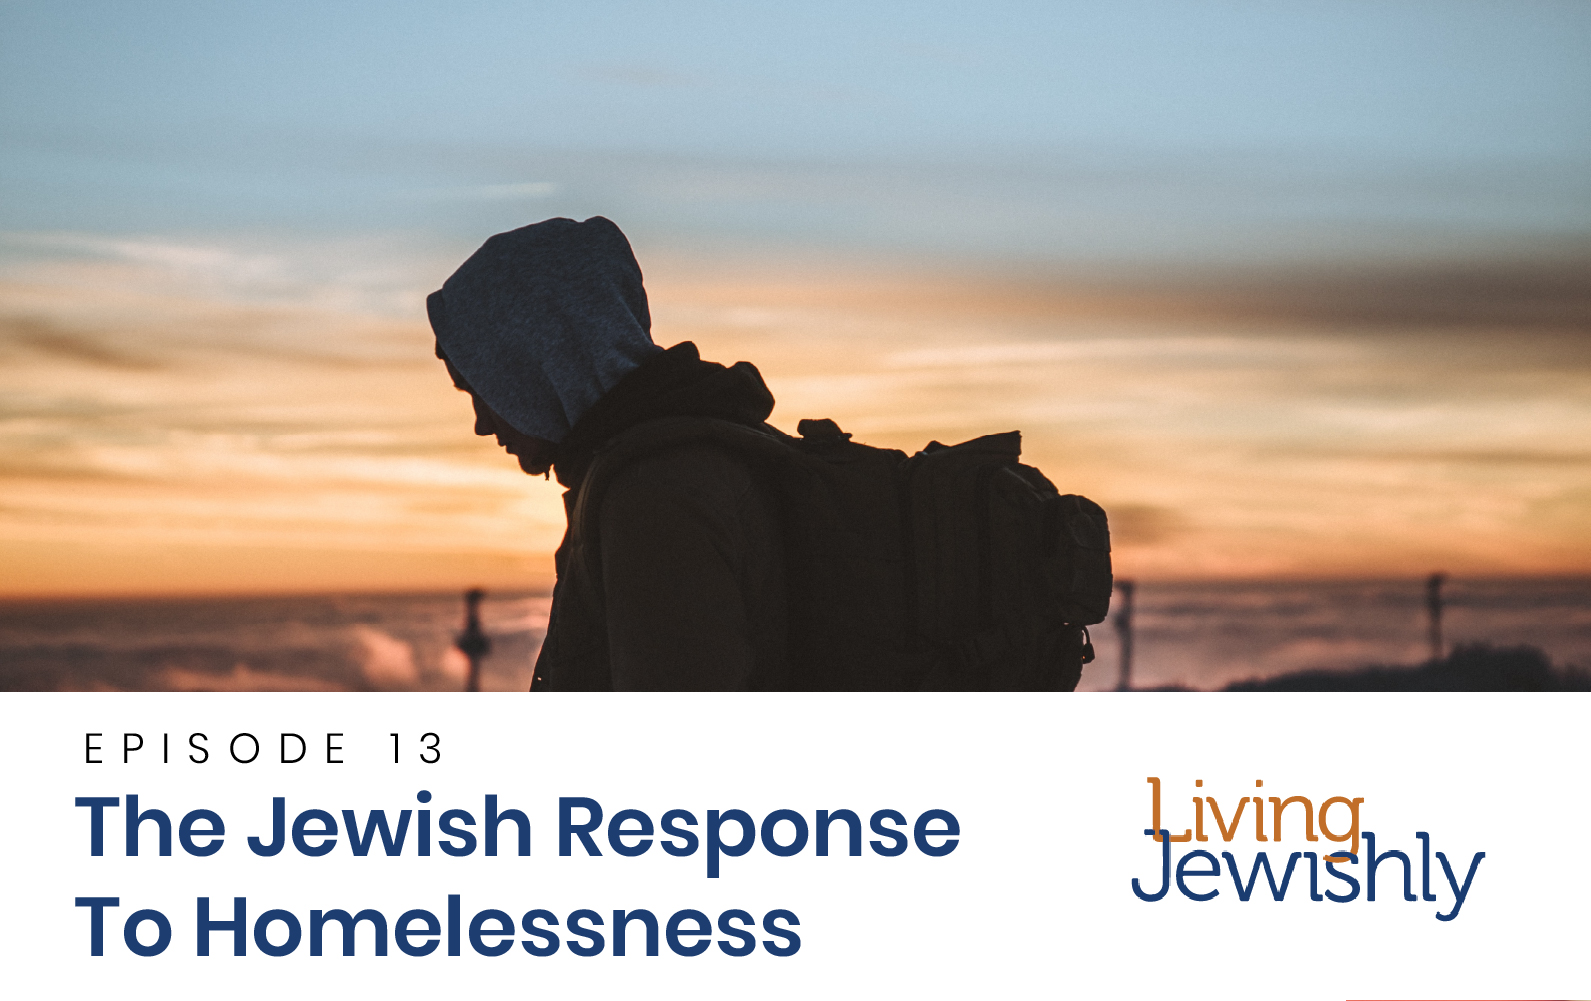 Episode 13: The Jewish Response To Homelessness